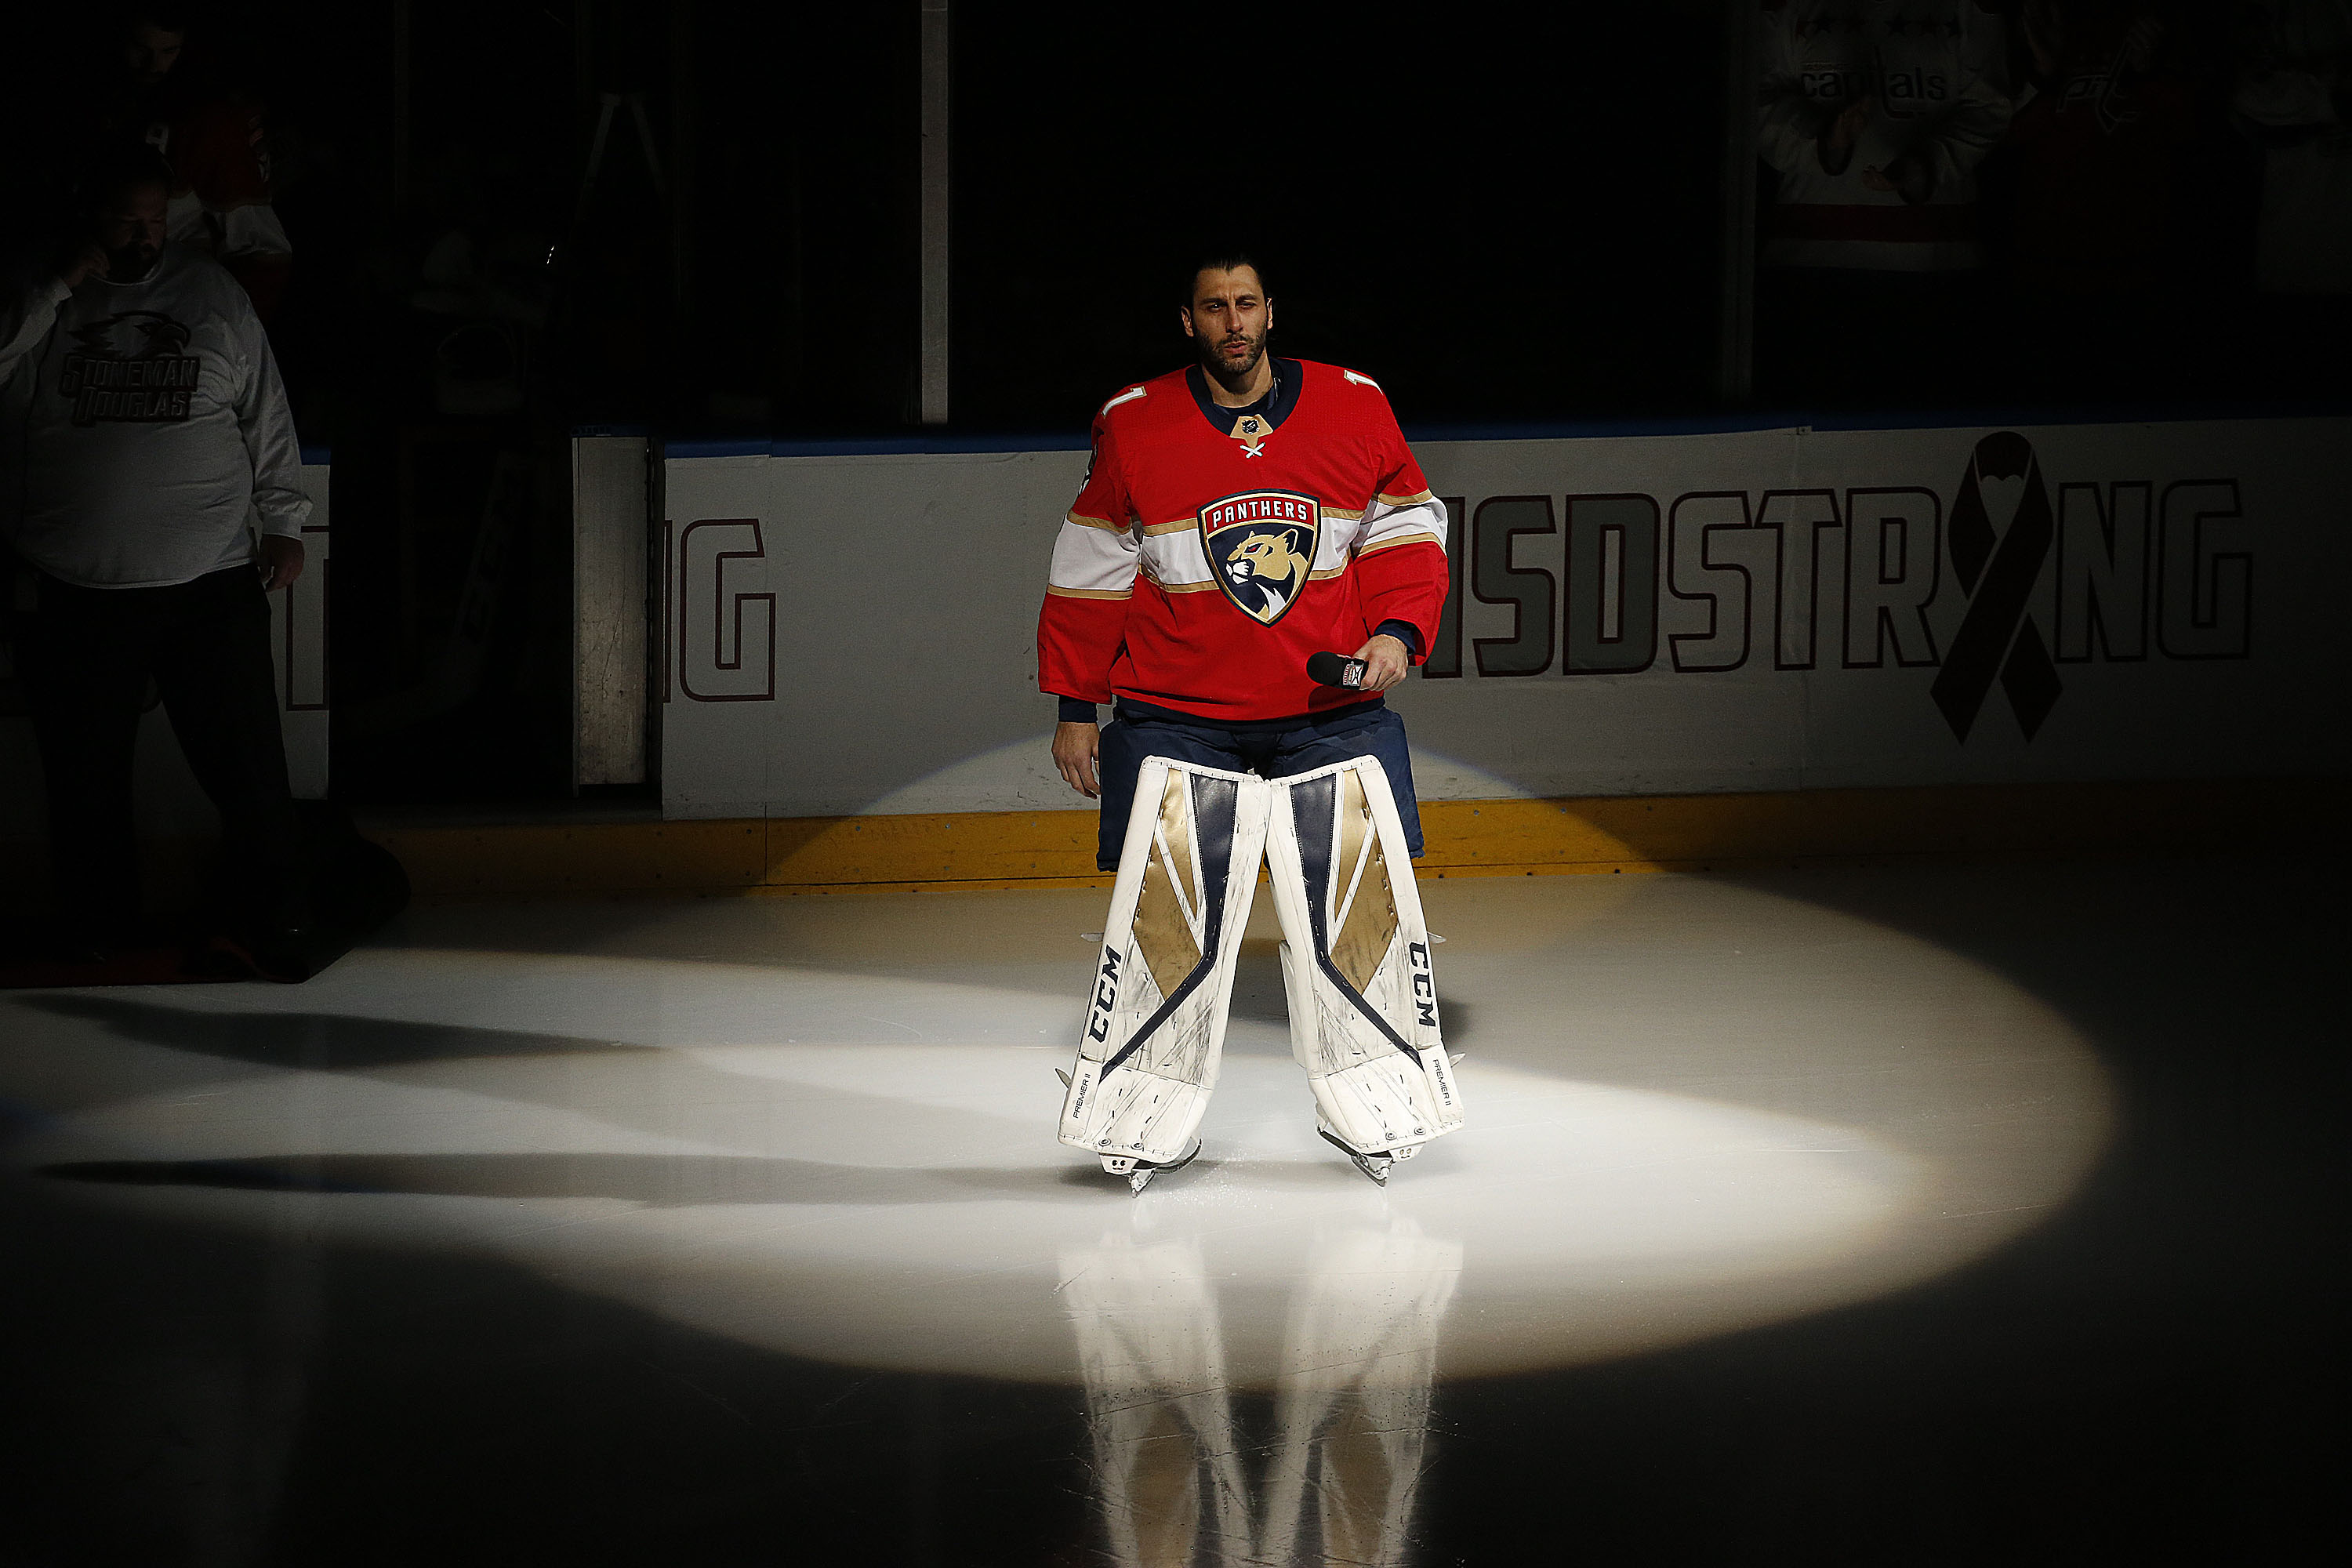 Goaltender Roberto Luongo #1 of the Florida Panthers who is a longtime resident of Parkland Florida speaks to the crowd prior to the start of the game against the Washington Capitals about the tragedy at Stoneman Douglas High School. at the BB&T Center on February 22, 2018 in Sunrise, Florida. (Photo by Eliot J. Schechter/NHLI via Getty Images)